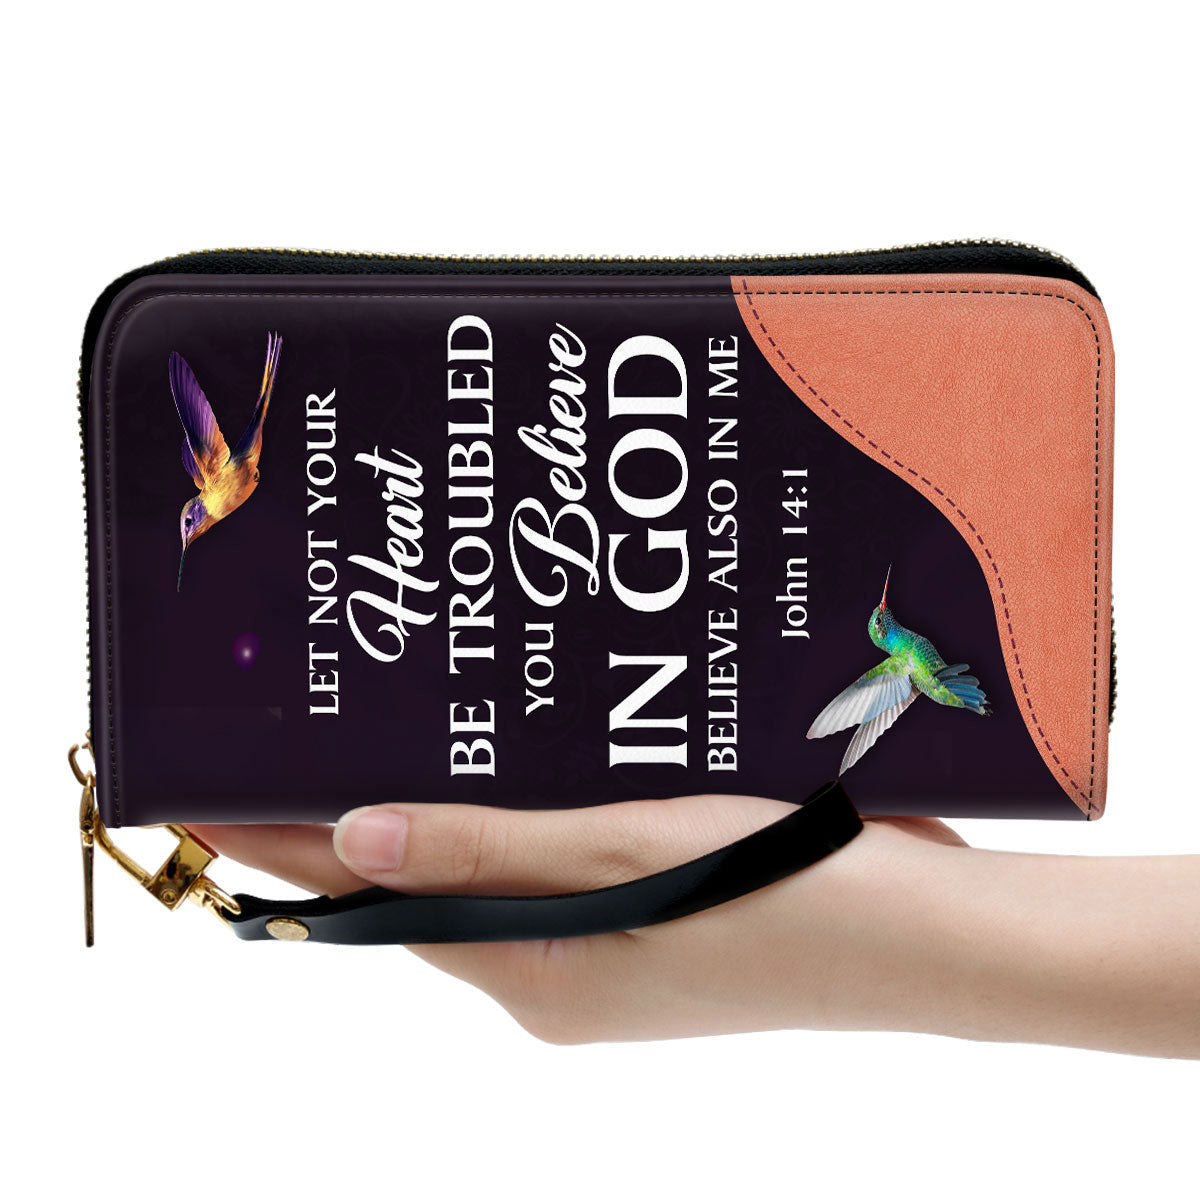 You Believe In God John 14 1 Clutch Purse For Women - Personalized Name - Christian Gifts For Women